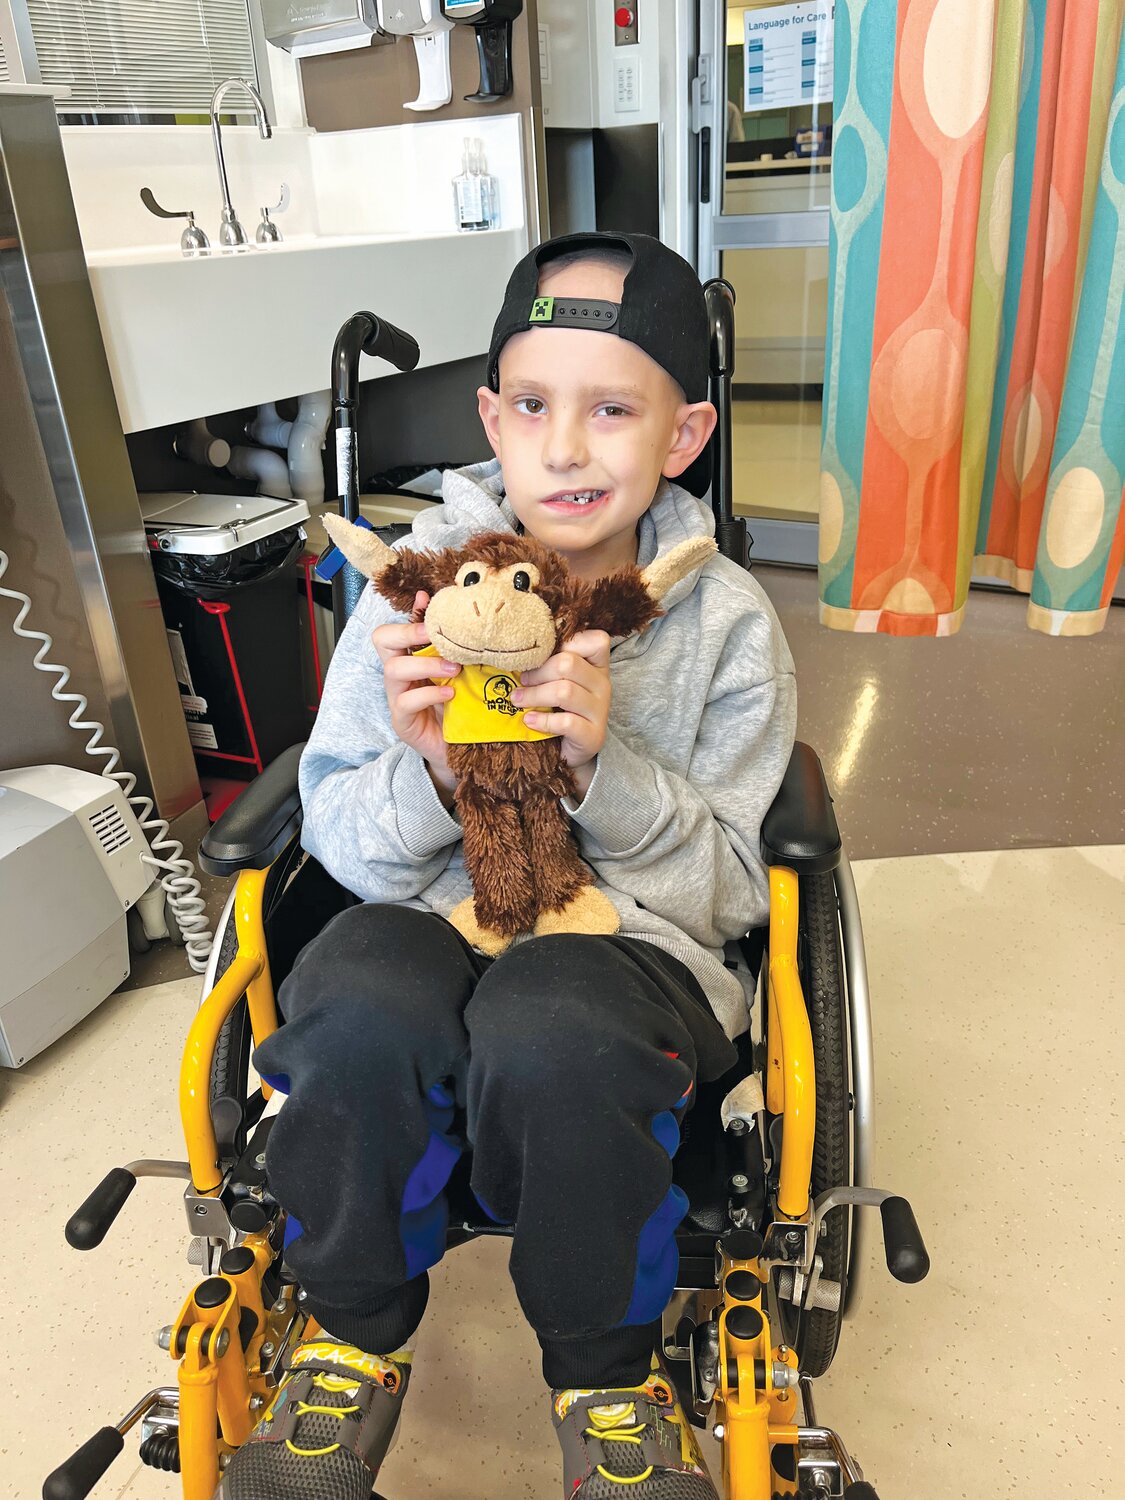 Brayden in wheelchair with Buddy the monkey at the beginning.